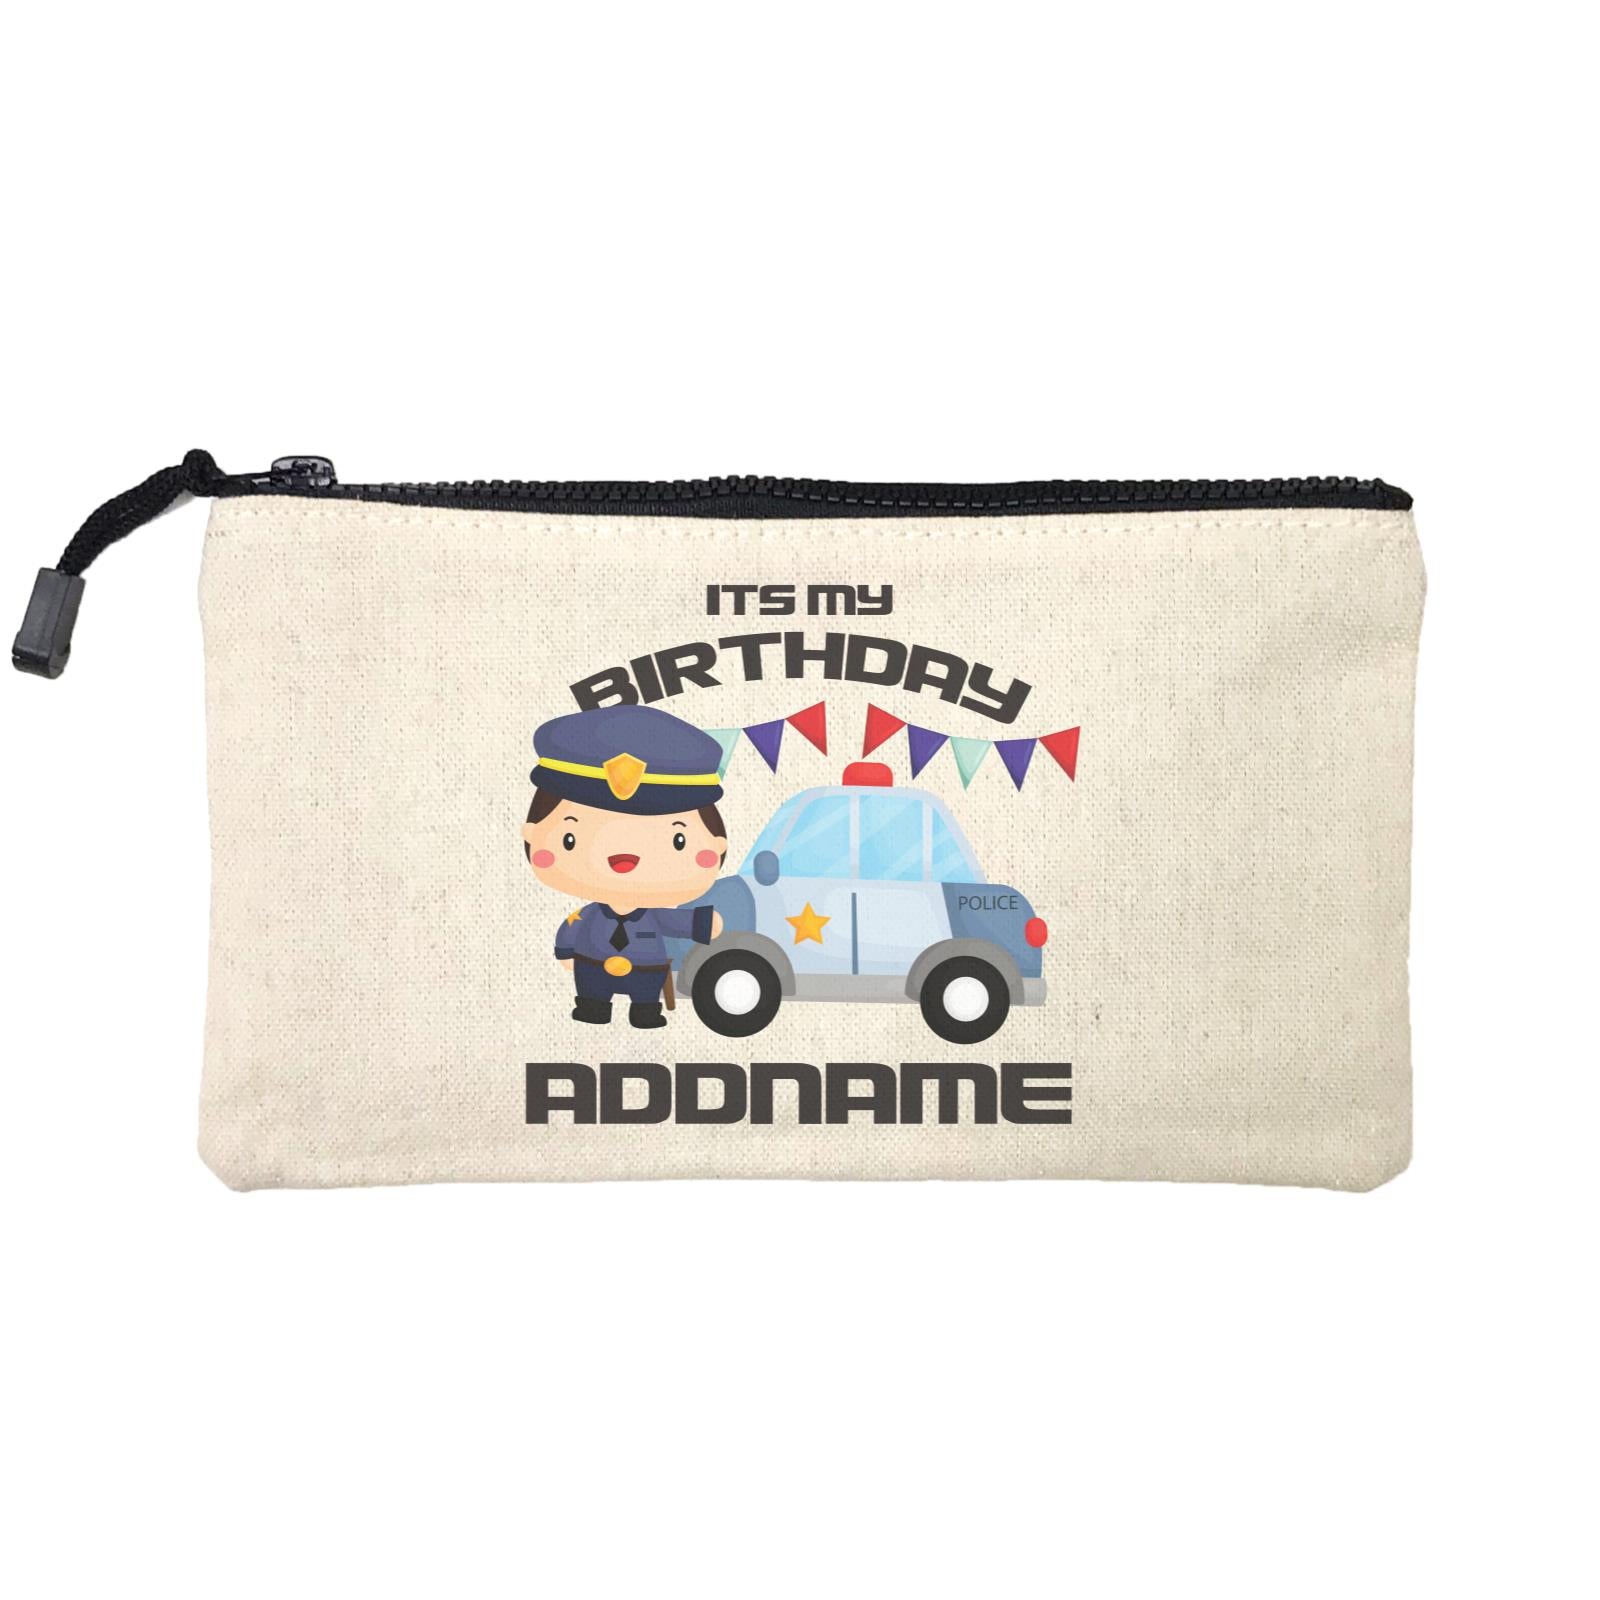 Birthday Police Officer Boy In Suit With Police Car Its My Birthday Addname Mini Accessories Stationery Pouch